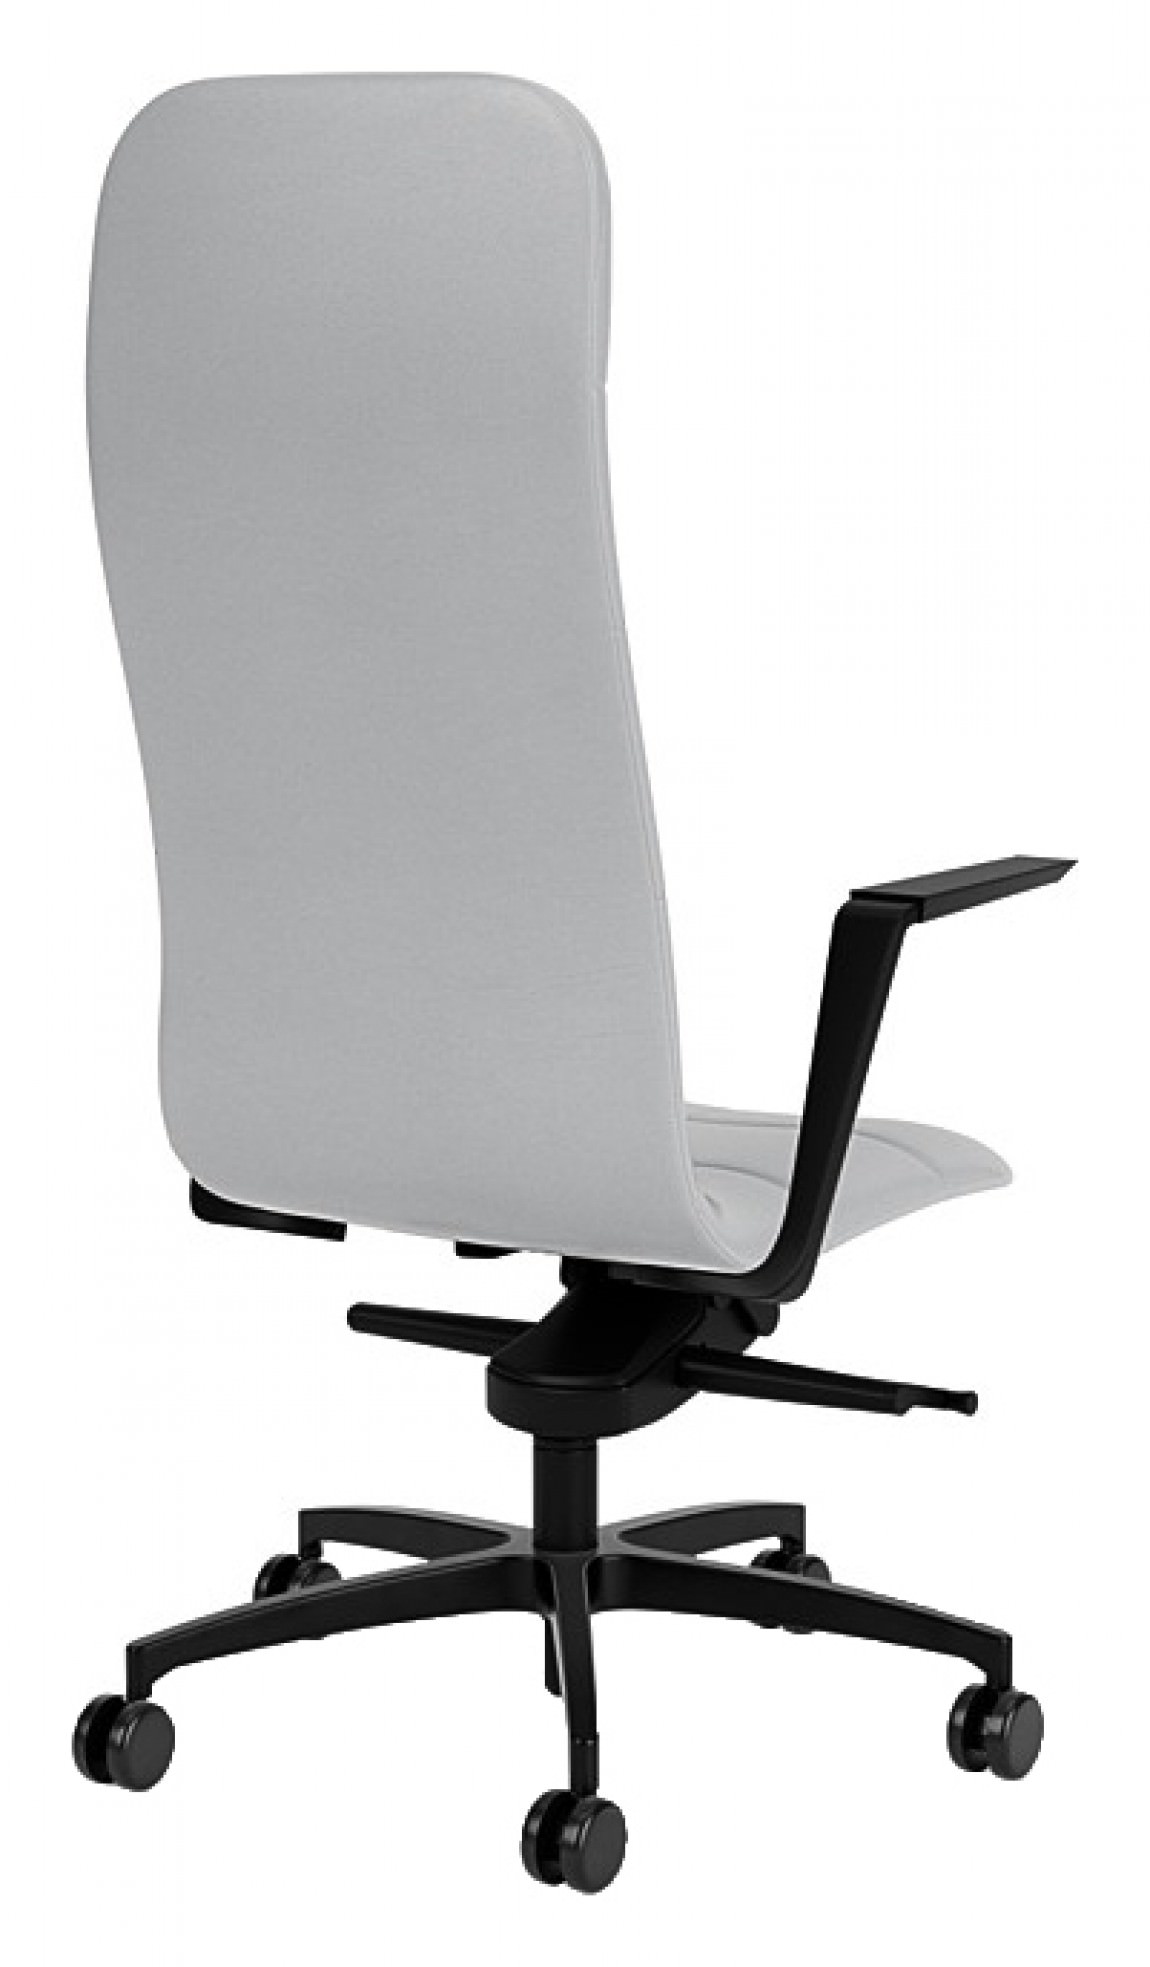 High Back Vinyl Conference Chair